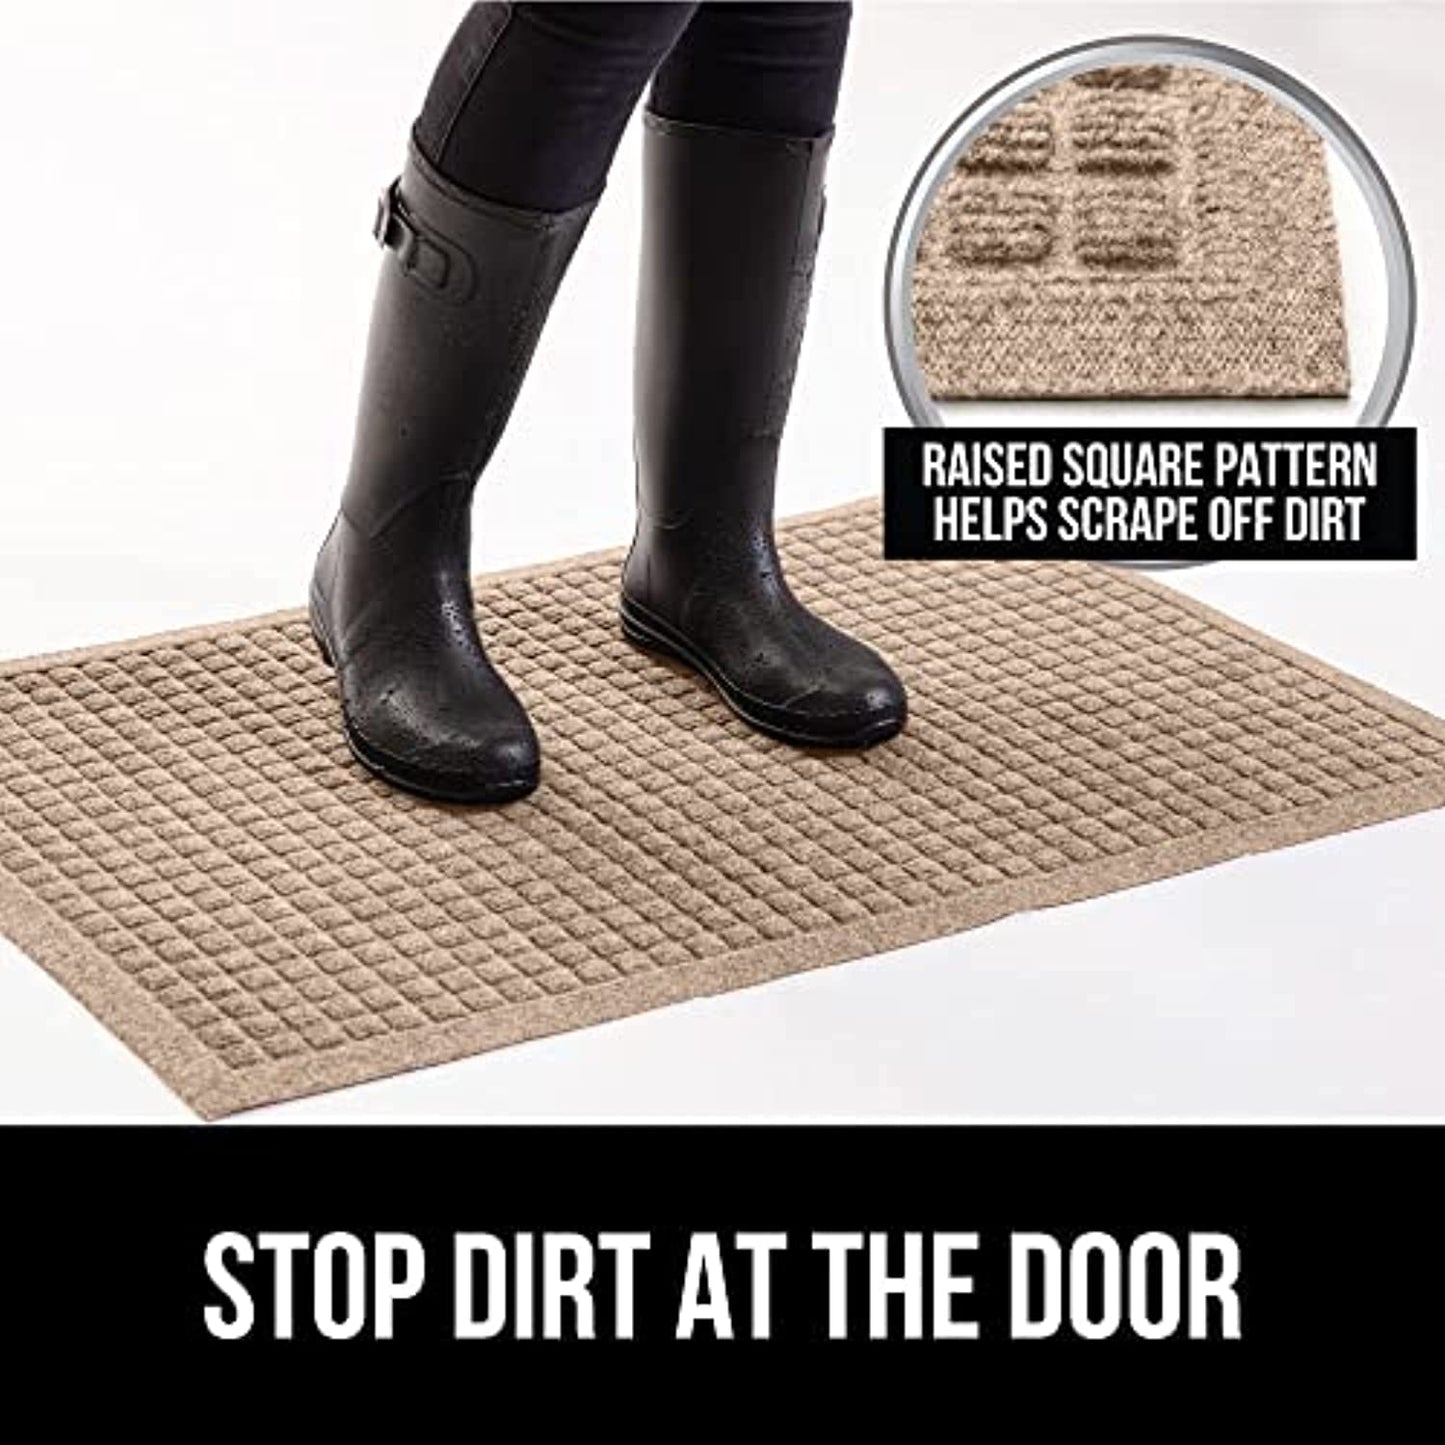 Gorilla Grip Durable All Weather Absorbent Doormat  Dries Quickly  Absorbs Up to 1.7 Cups of Water  Stain and Fade Resistant  Captures Dirt  Indoor and Outdoor Mats  Boot Scraper  29x17  Charcoal